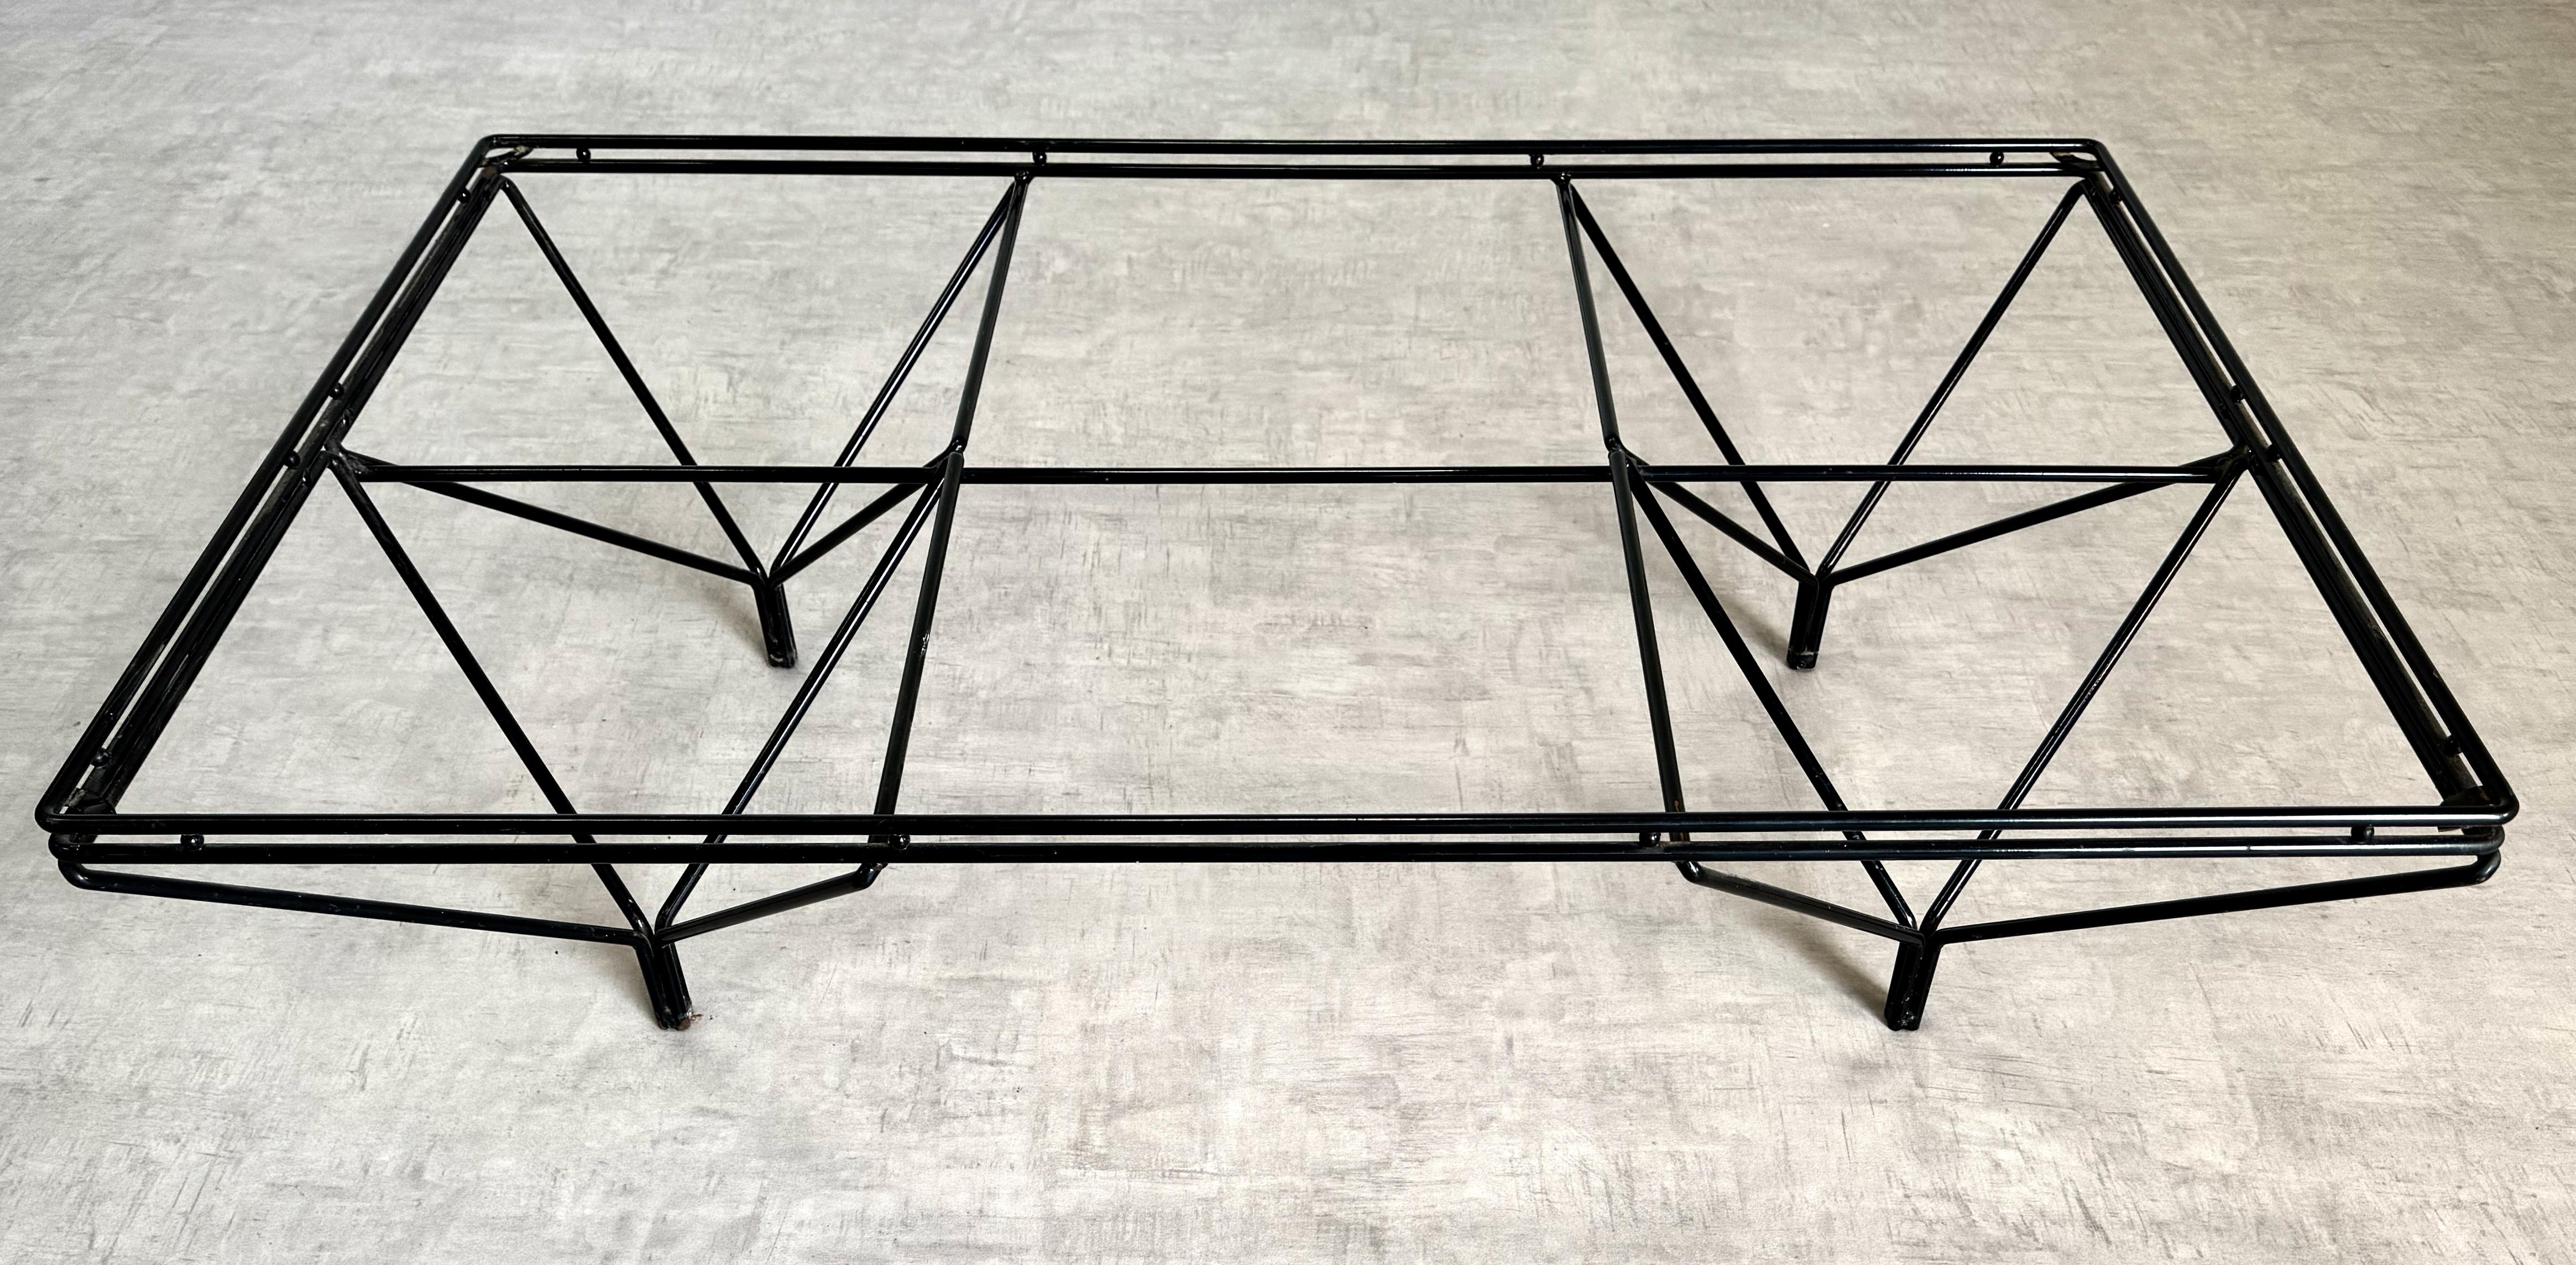 Blackened wrought iron coffee table made in Italy in 1980s. In the same style as Paolo Piva's 